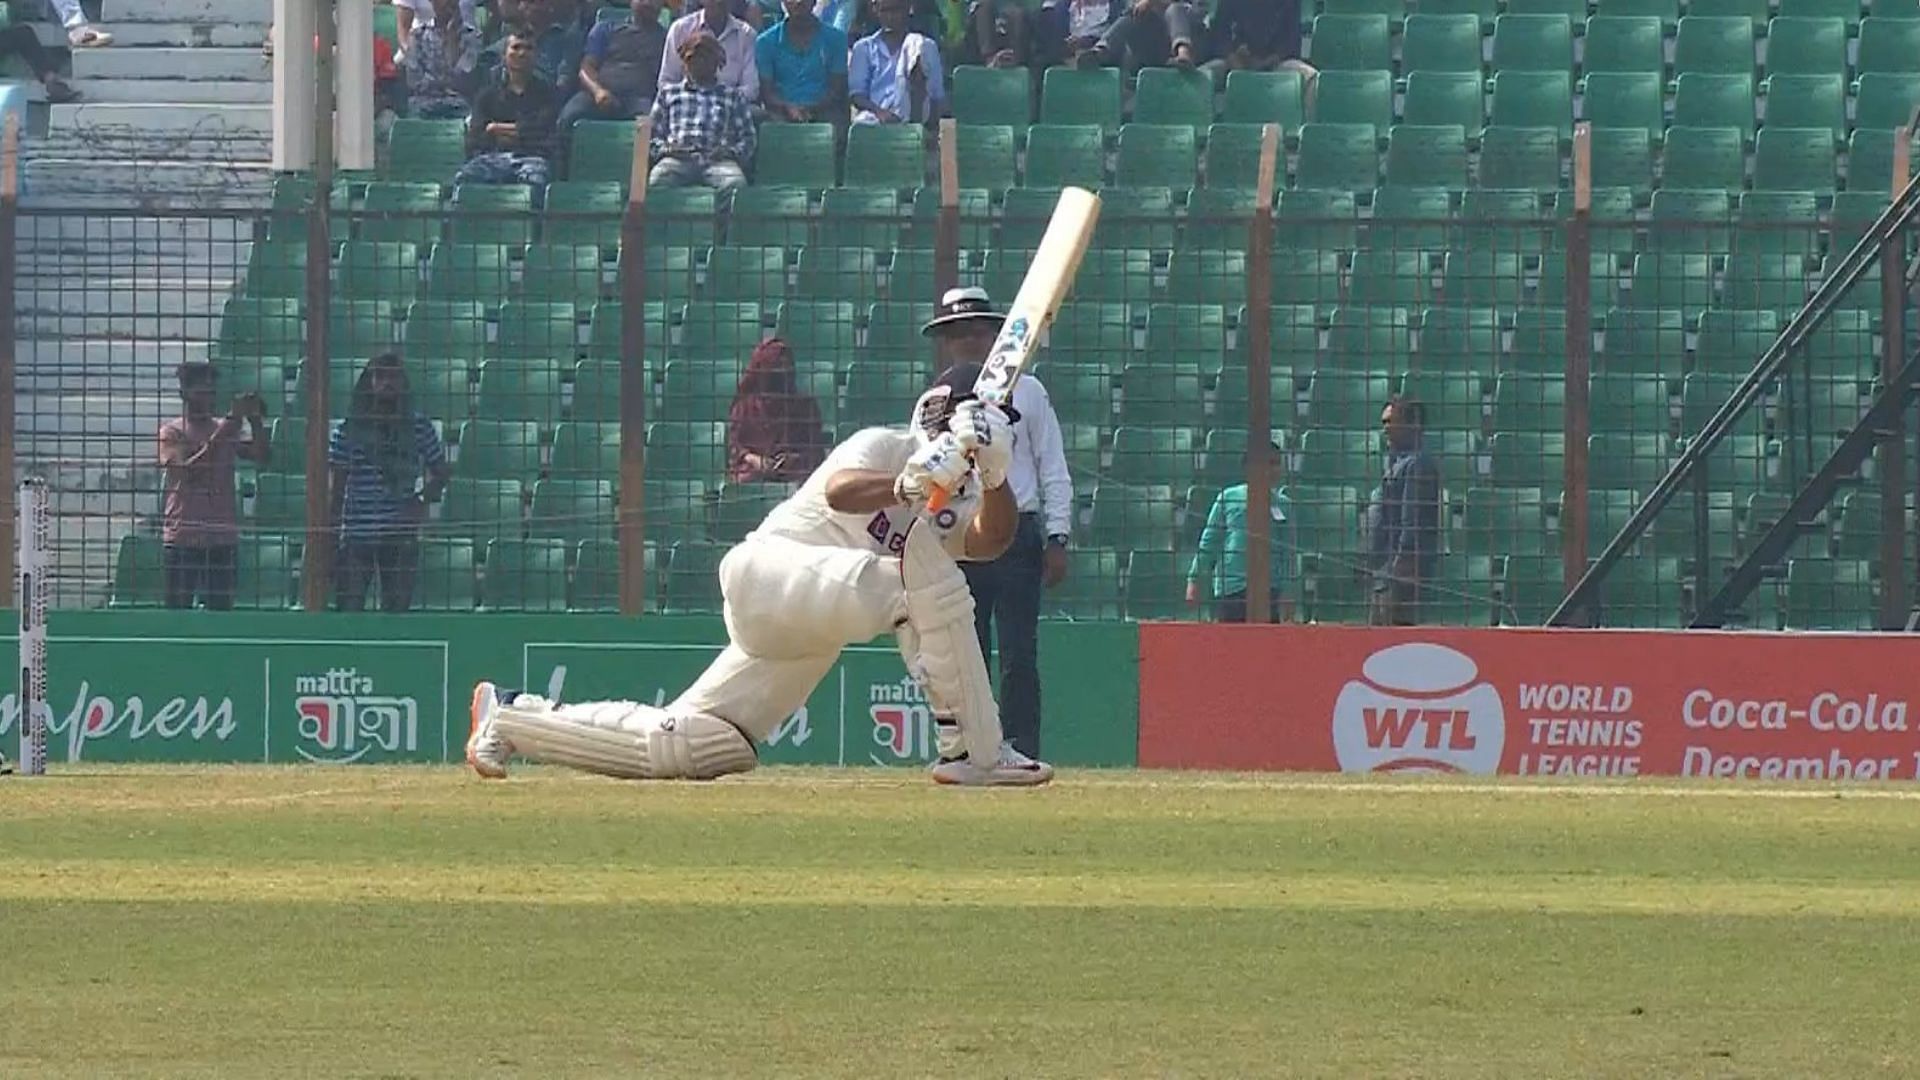 Rishabh Pant smashed Mehidy Hasan over mid wicket to reach the milestone of 50 sixes in Tests. (P.C.:Twitter)